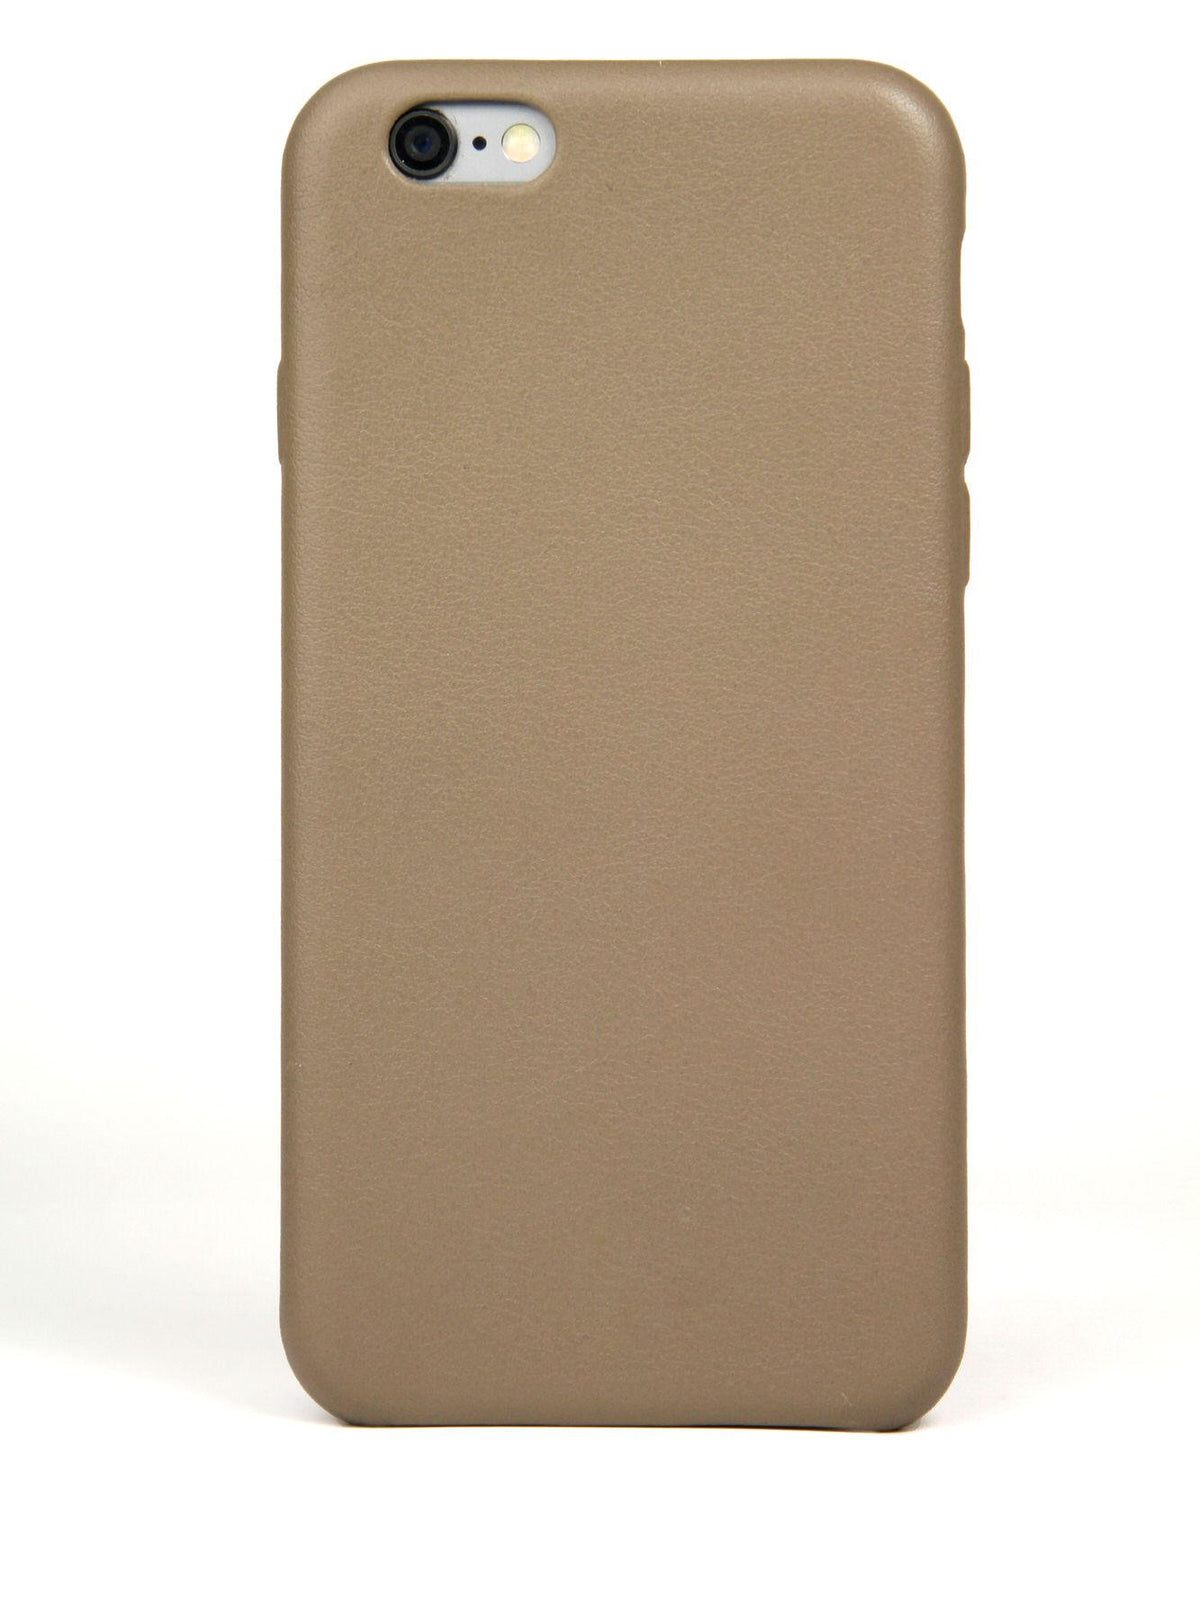 Coque iPhone 6, cuir taupe